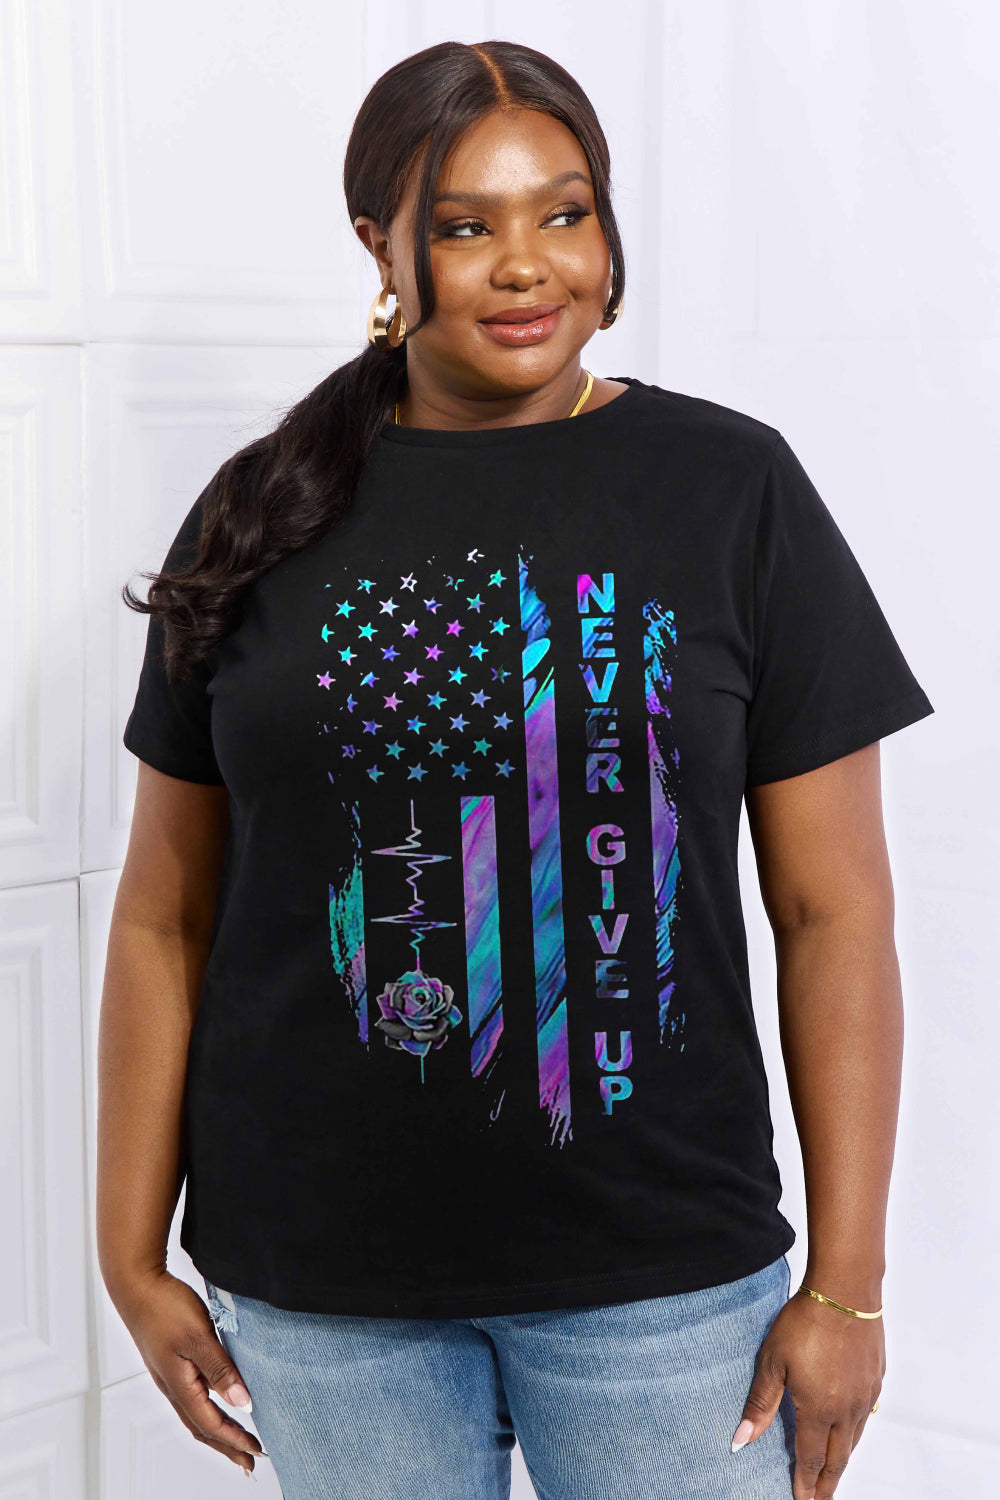 NEVER GIVE UP Graphic Cotton Tee - T-Shirts - Shirts & Tops - 14 - 2024